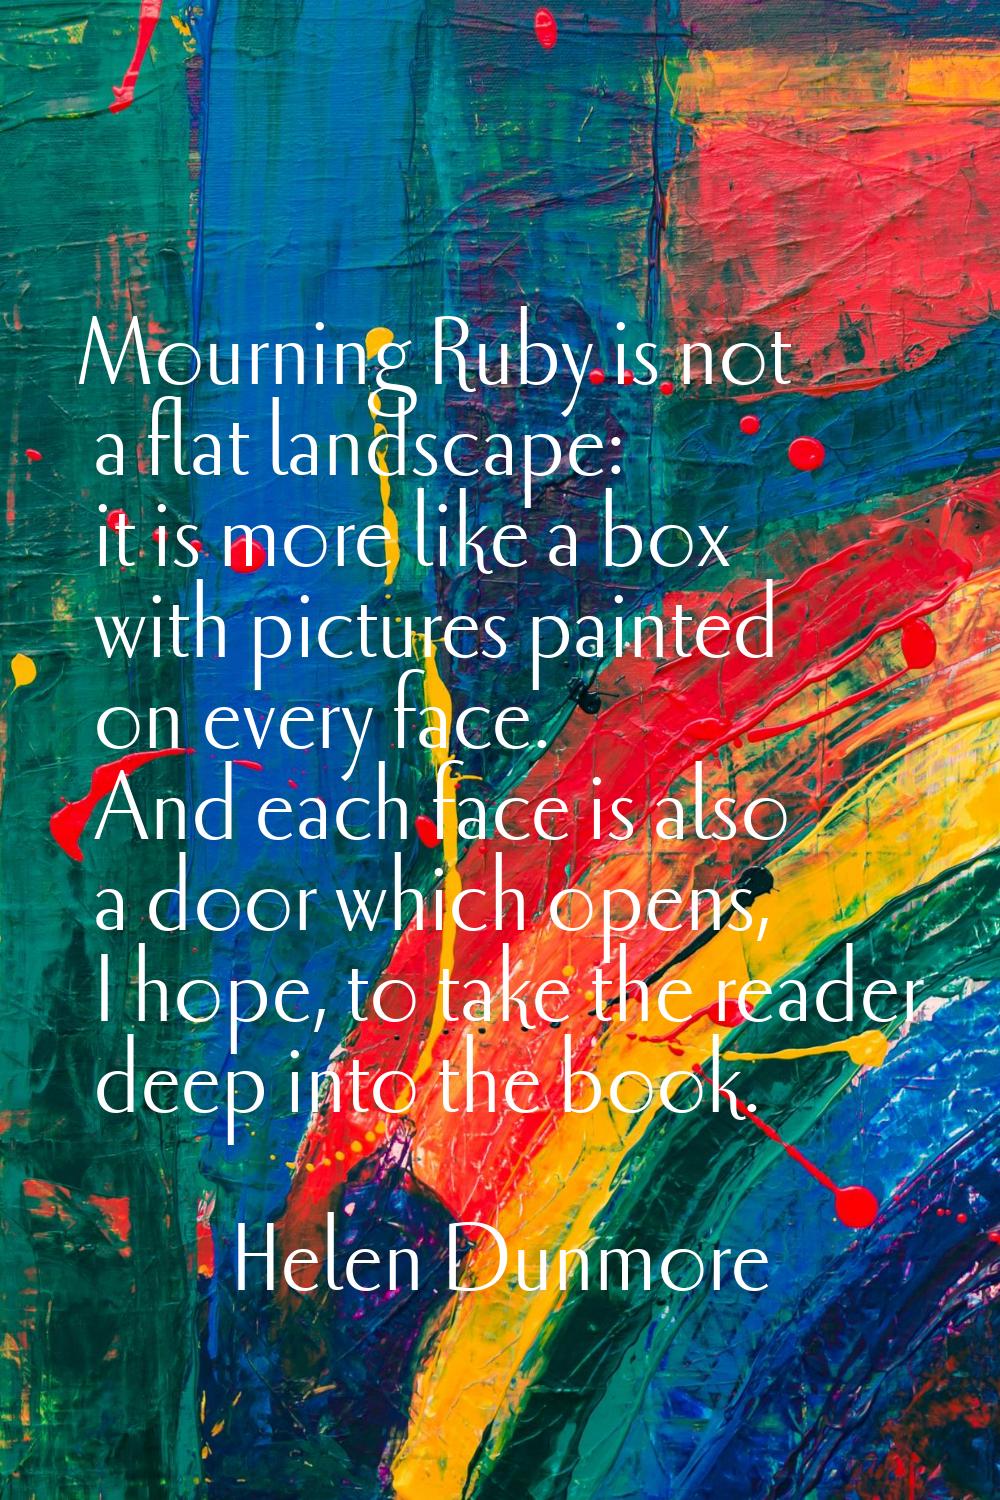 Mourning Ruby is not a flat landscape: it is more like a box with pictures painted on every face. A